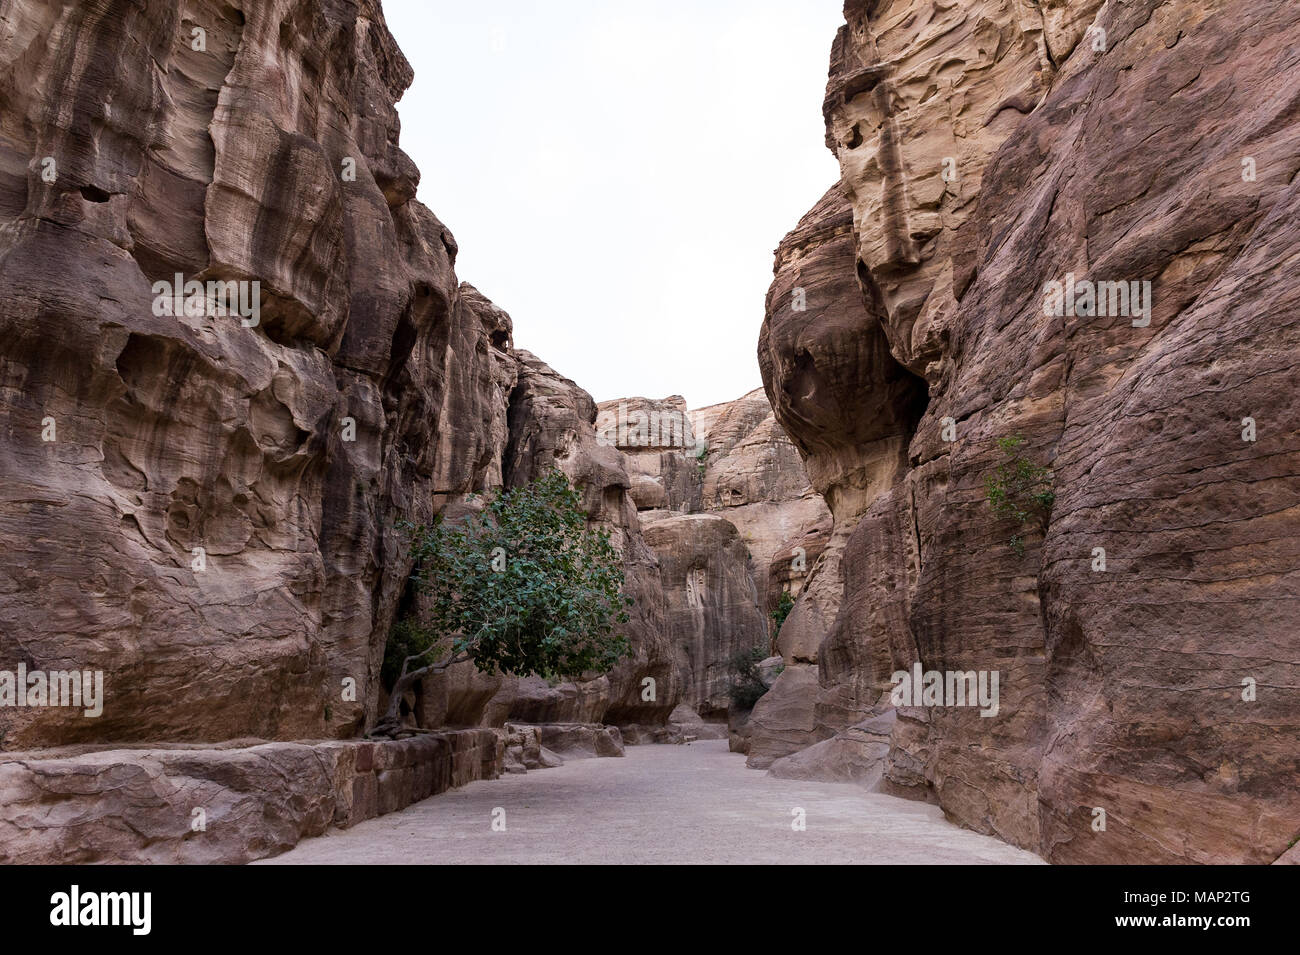 The Siq is the main entry road that leads to the Treasary hall in the archeological city Petra, Jordan. Stock Photo